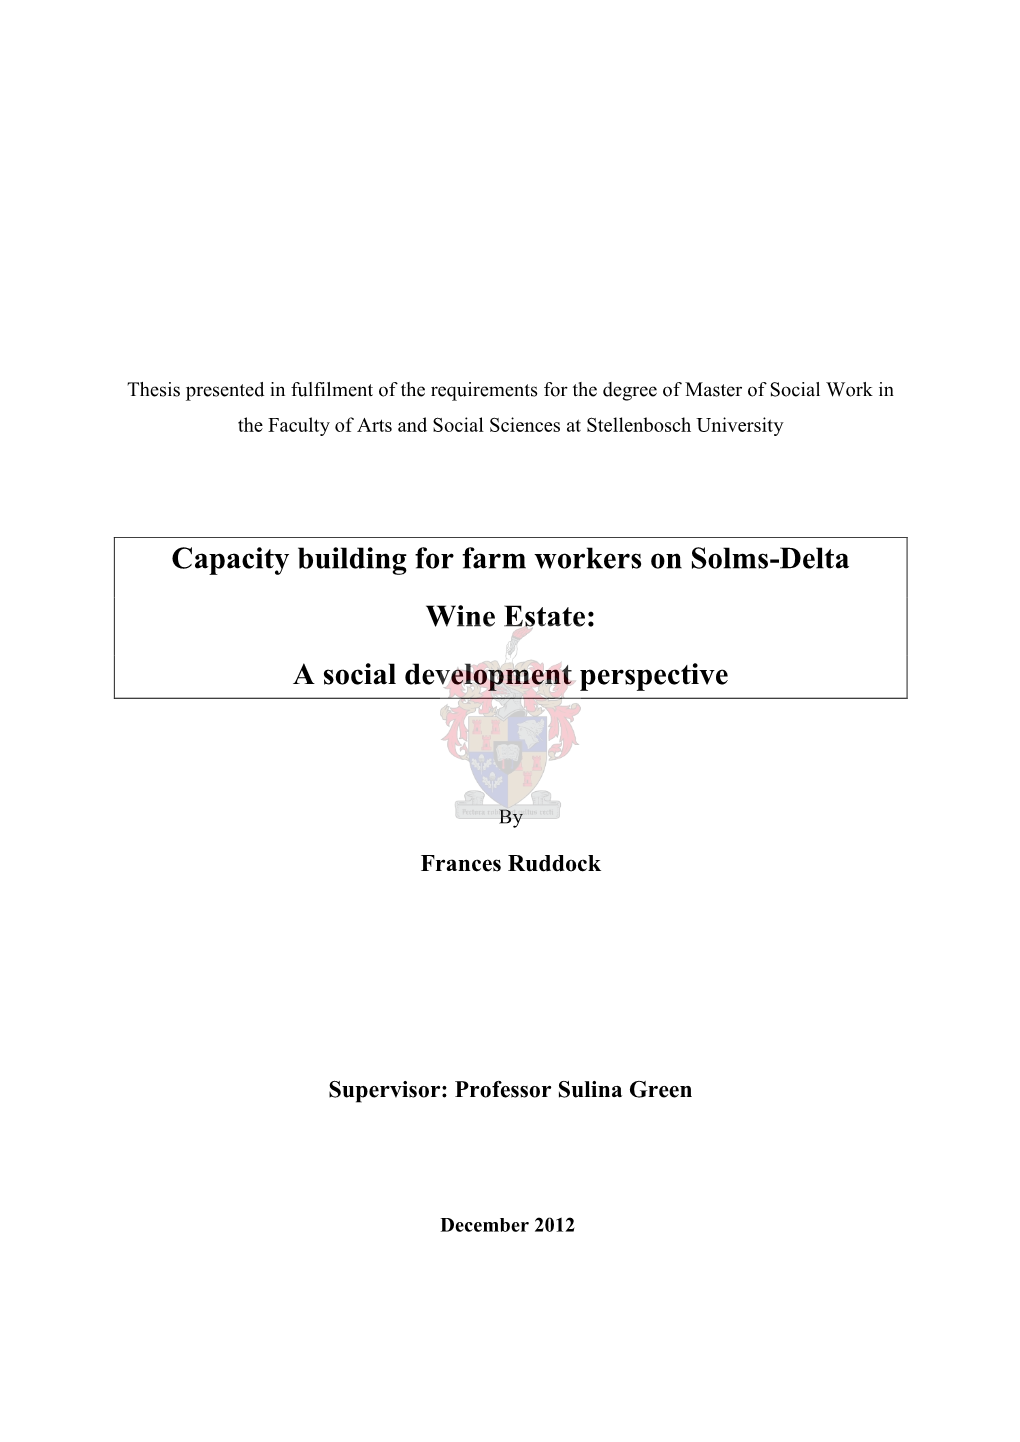 Capacity Building for Farm Workers on Solms-Delta Wine Estate: a Social Development Perspective